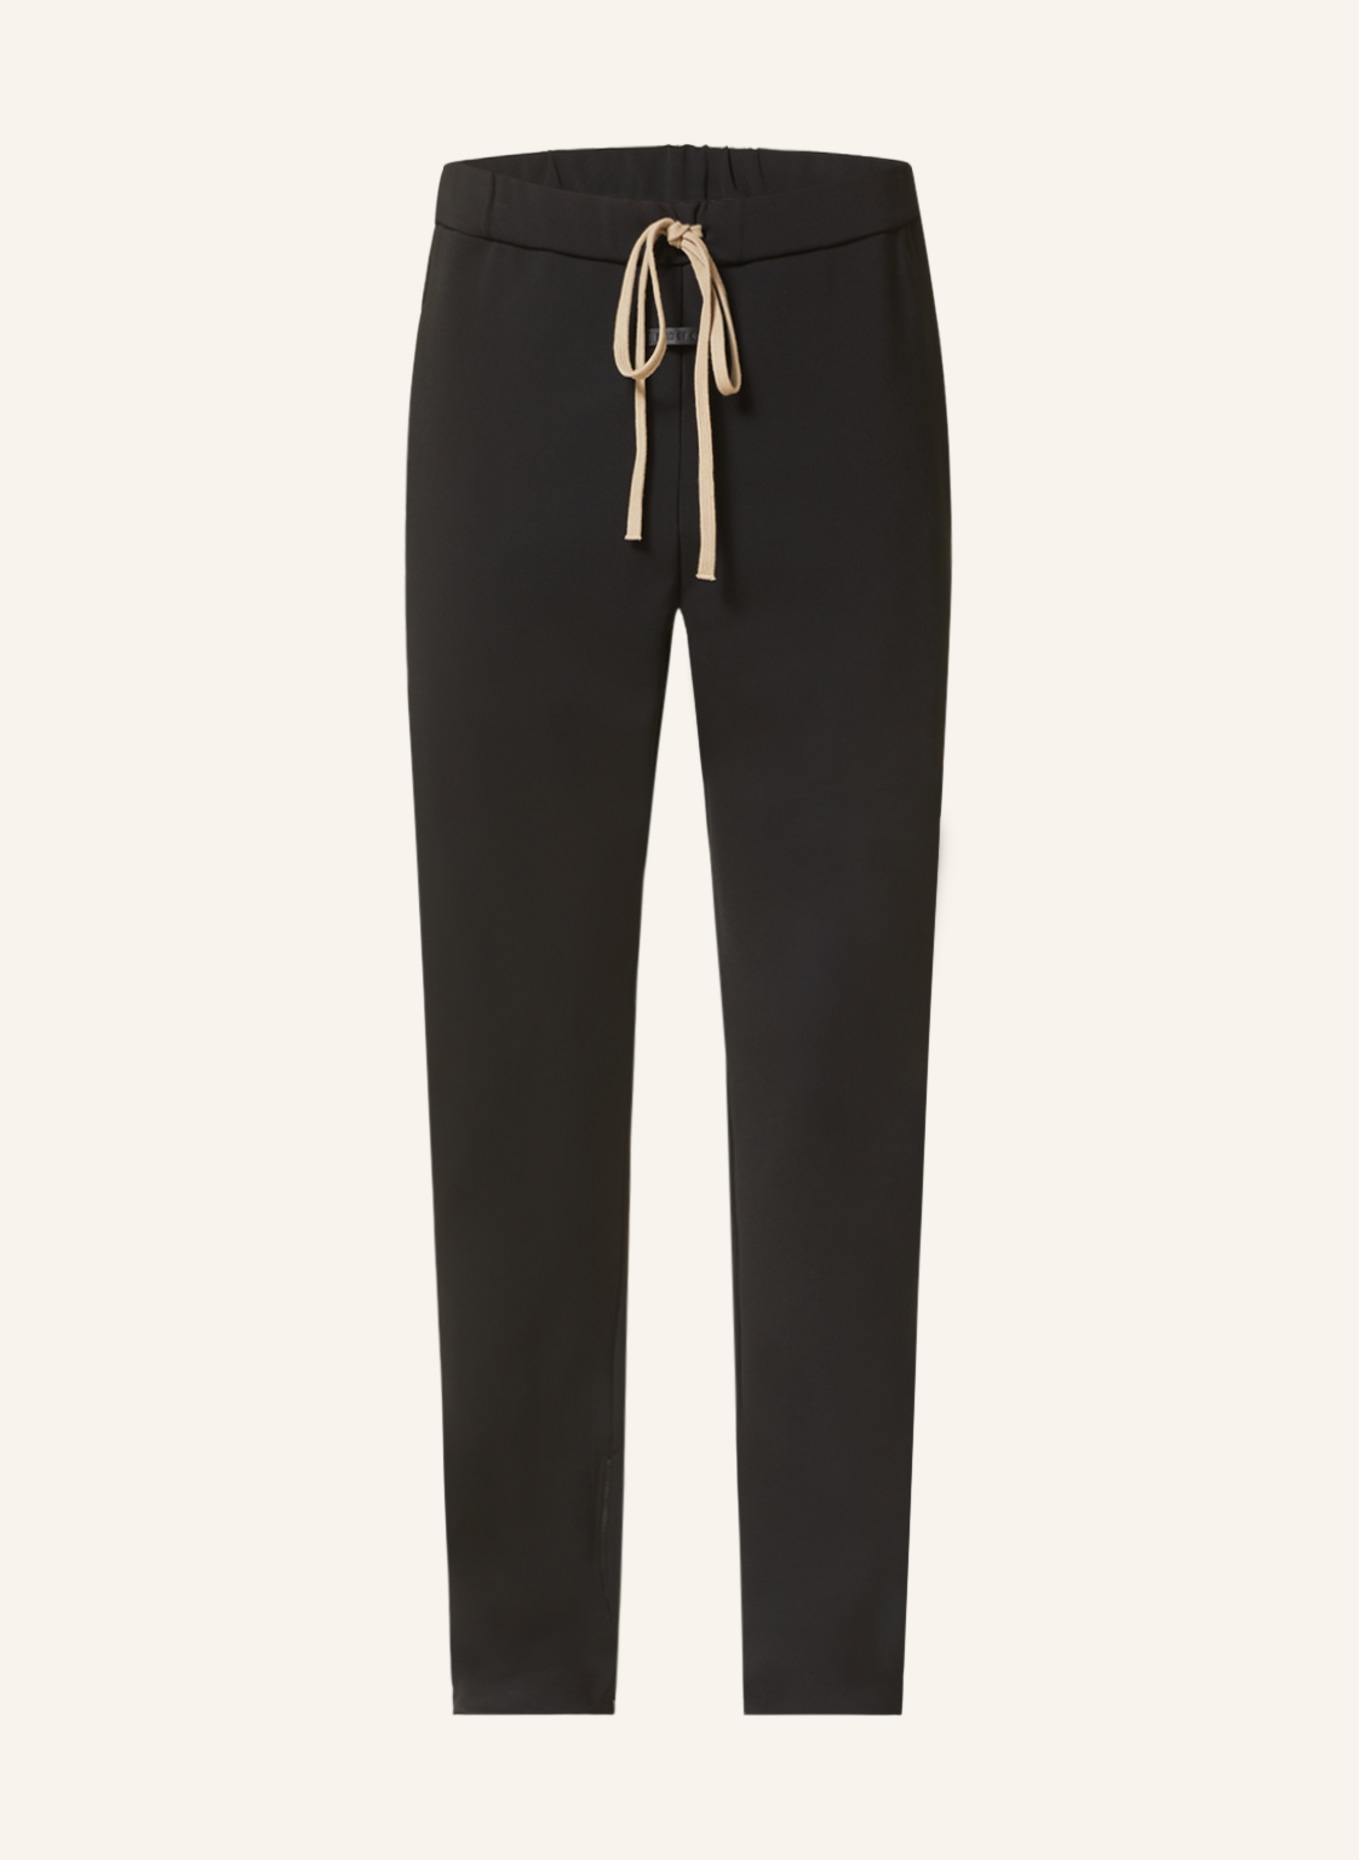 FEAR OF GOD Pants in jogger style slim fit, Color: BLACK (Image 1)